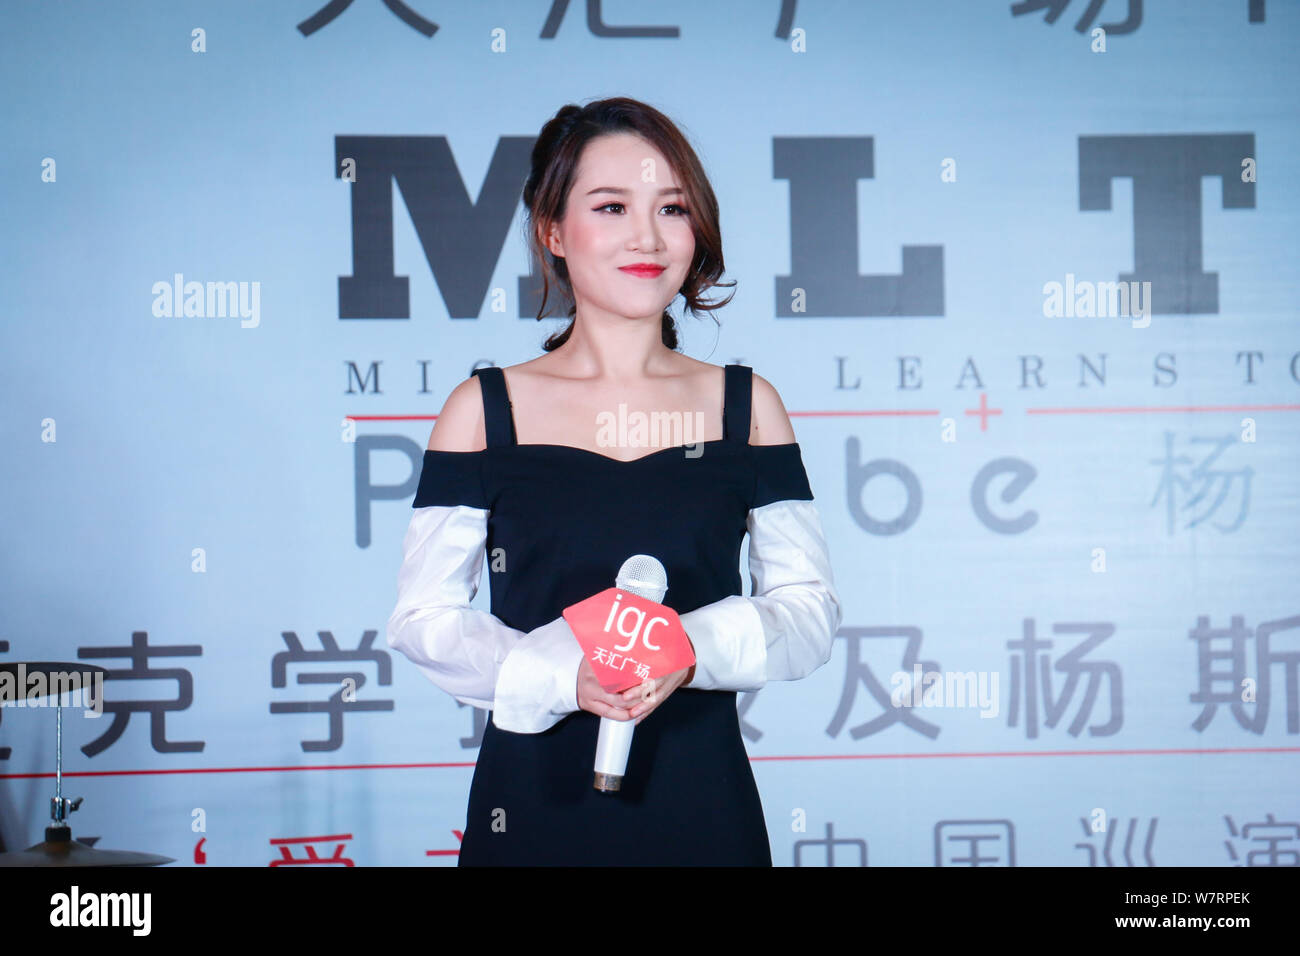 Chinese singer Phoebe Yang or Yang Sijie attends a press conference to promote the China concert tour of Danish rock band Michael Learns to Rock (MLTR Stock Photo